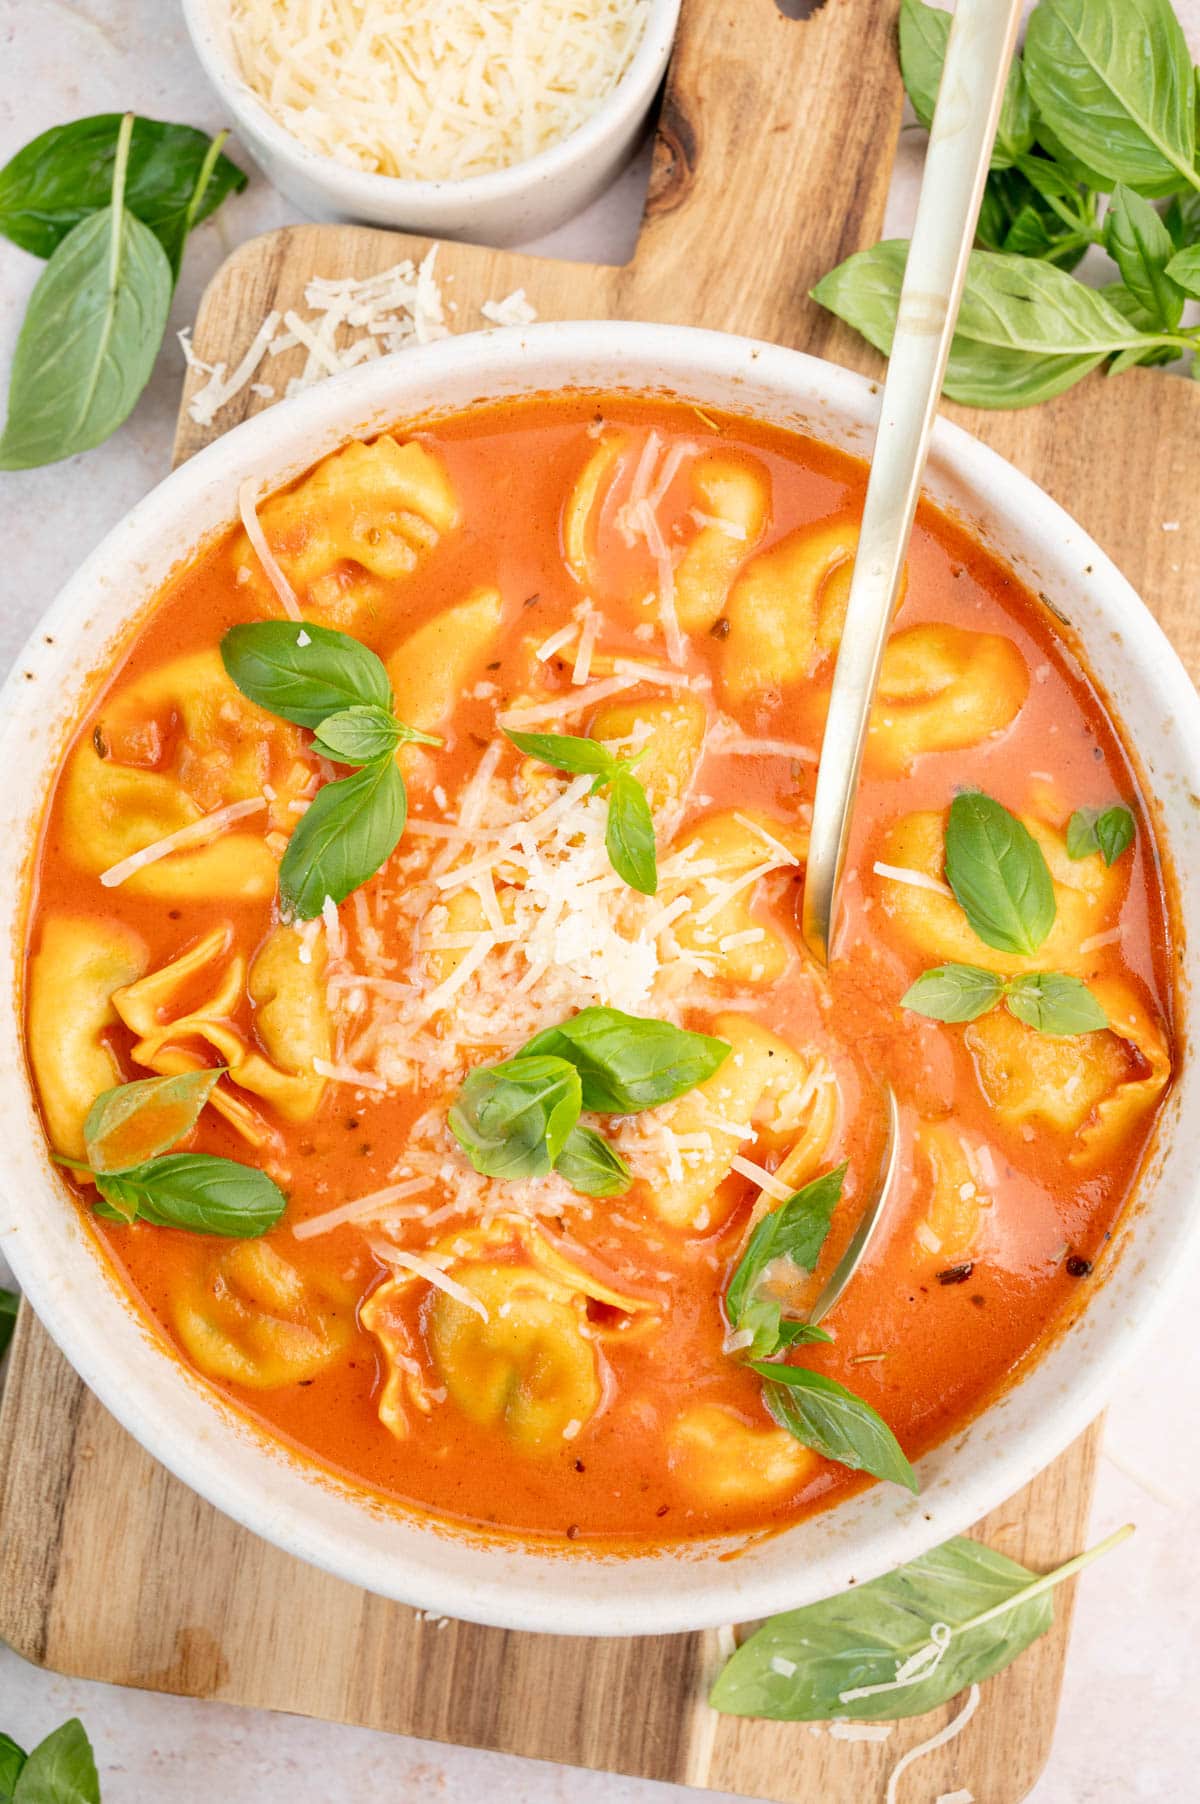 Tomato tortellini soup topped with grated parmesan and basil leaves in a white bowl.